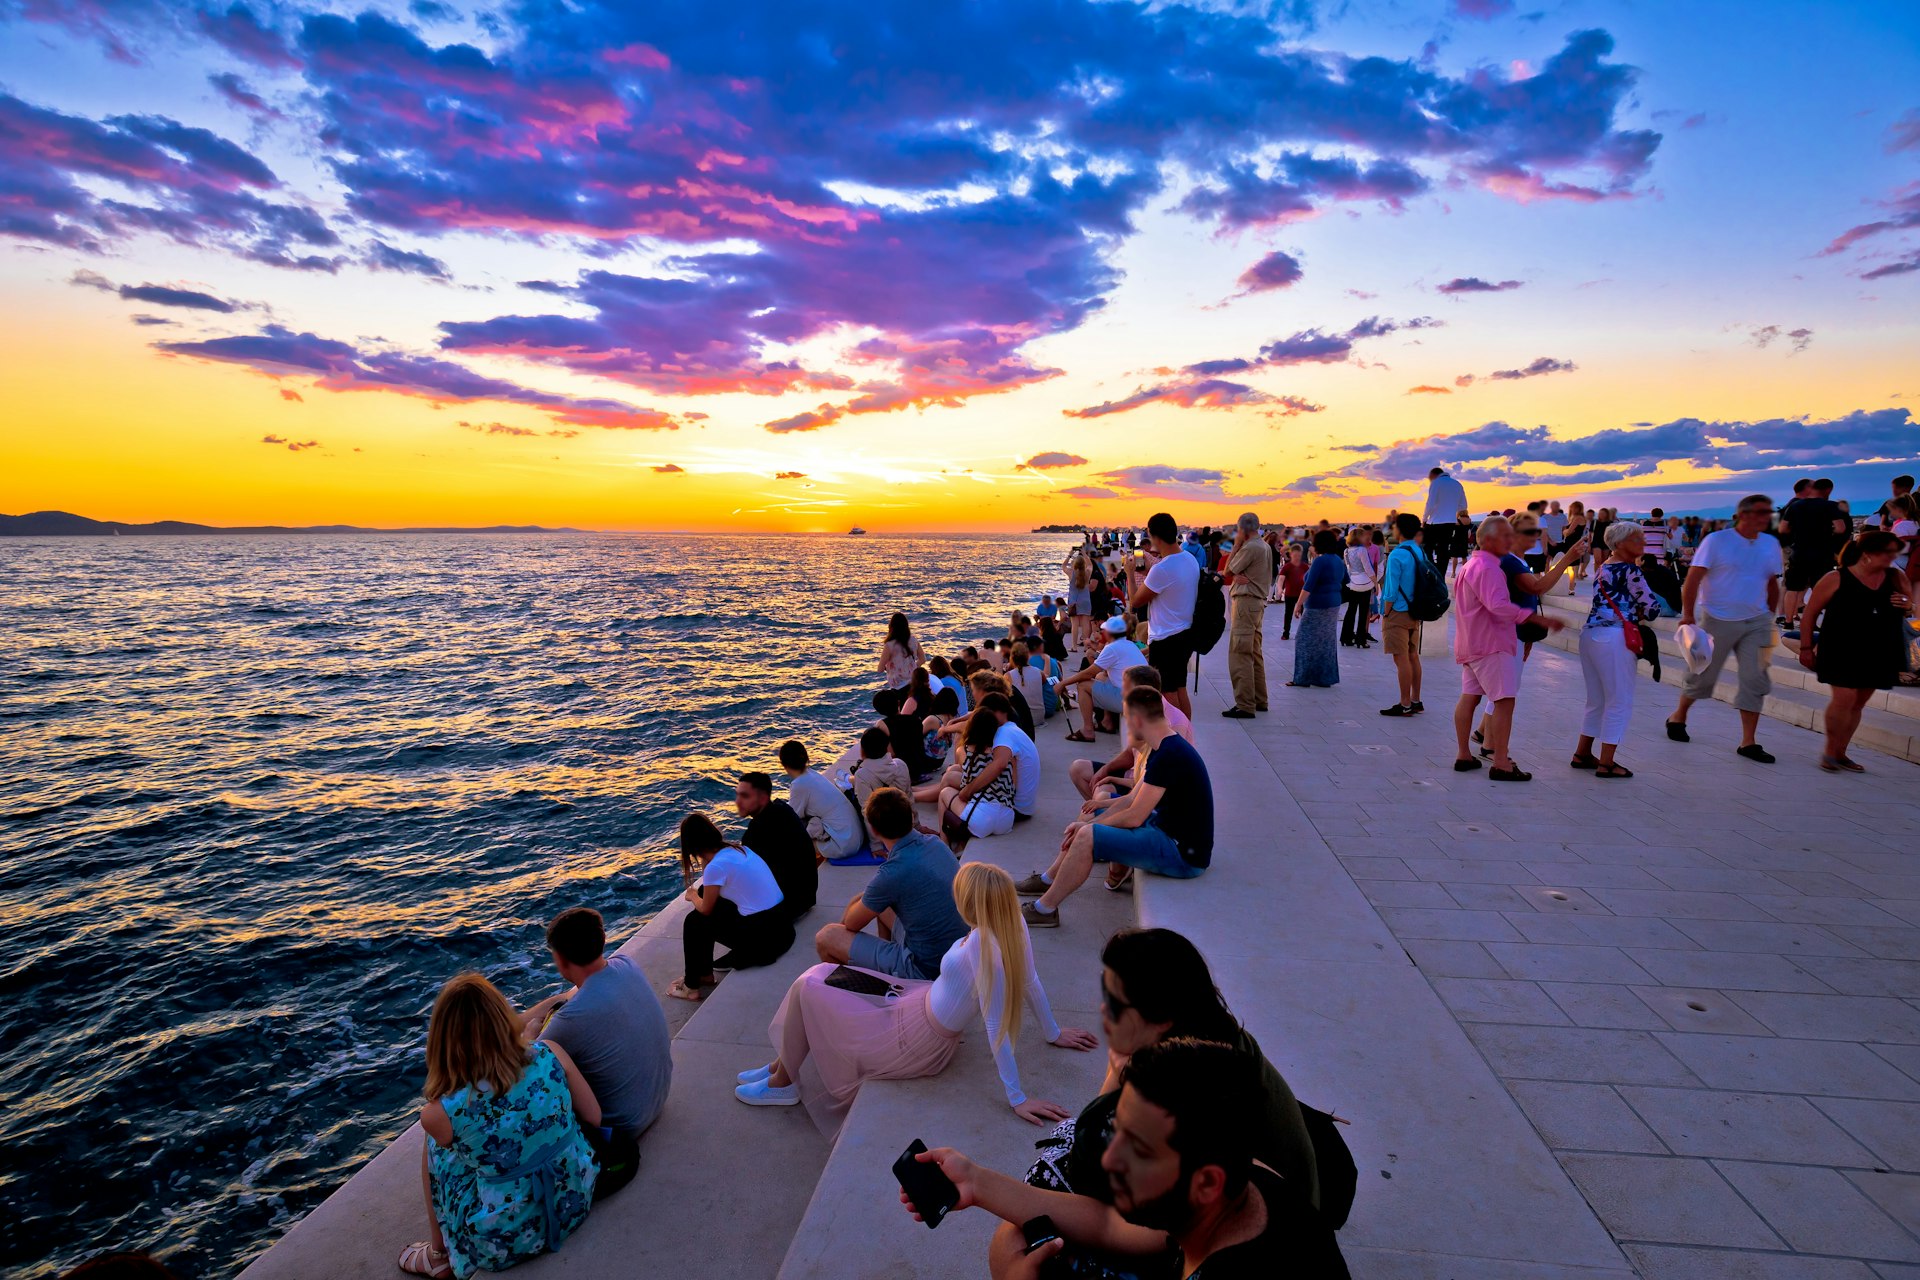 People sit on steps by the sea as the sun casts oranges, yellows, blues and purples across the sky at sunset